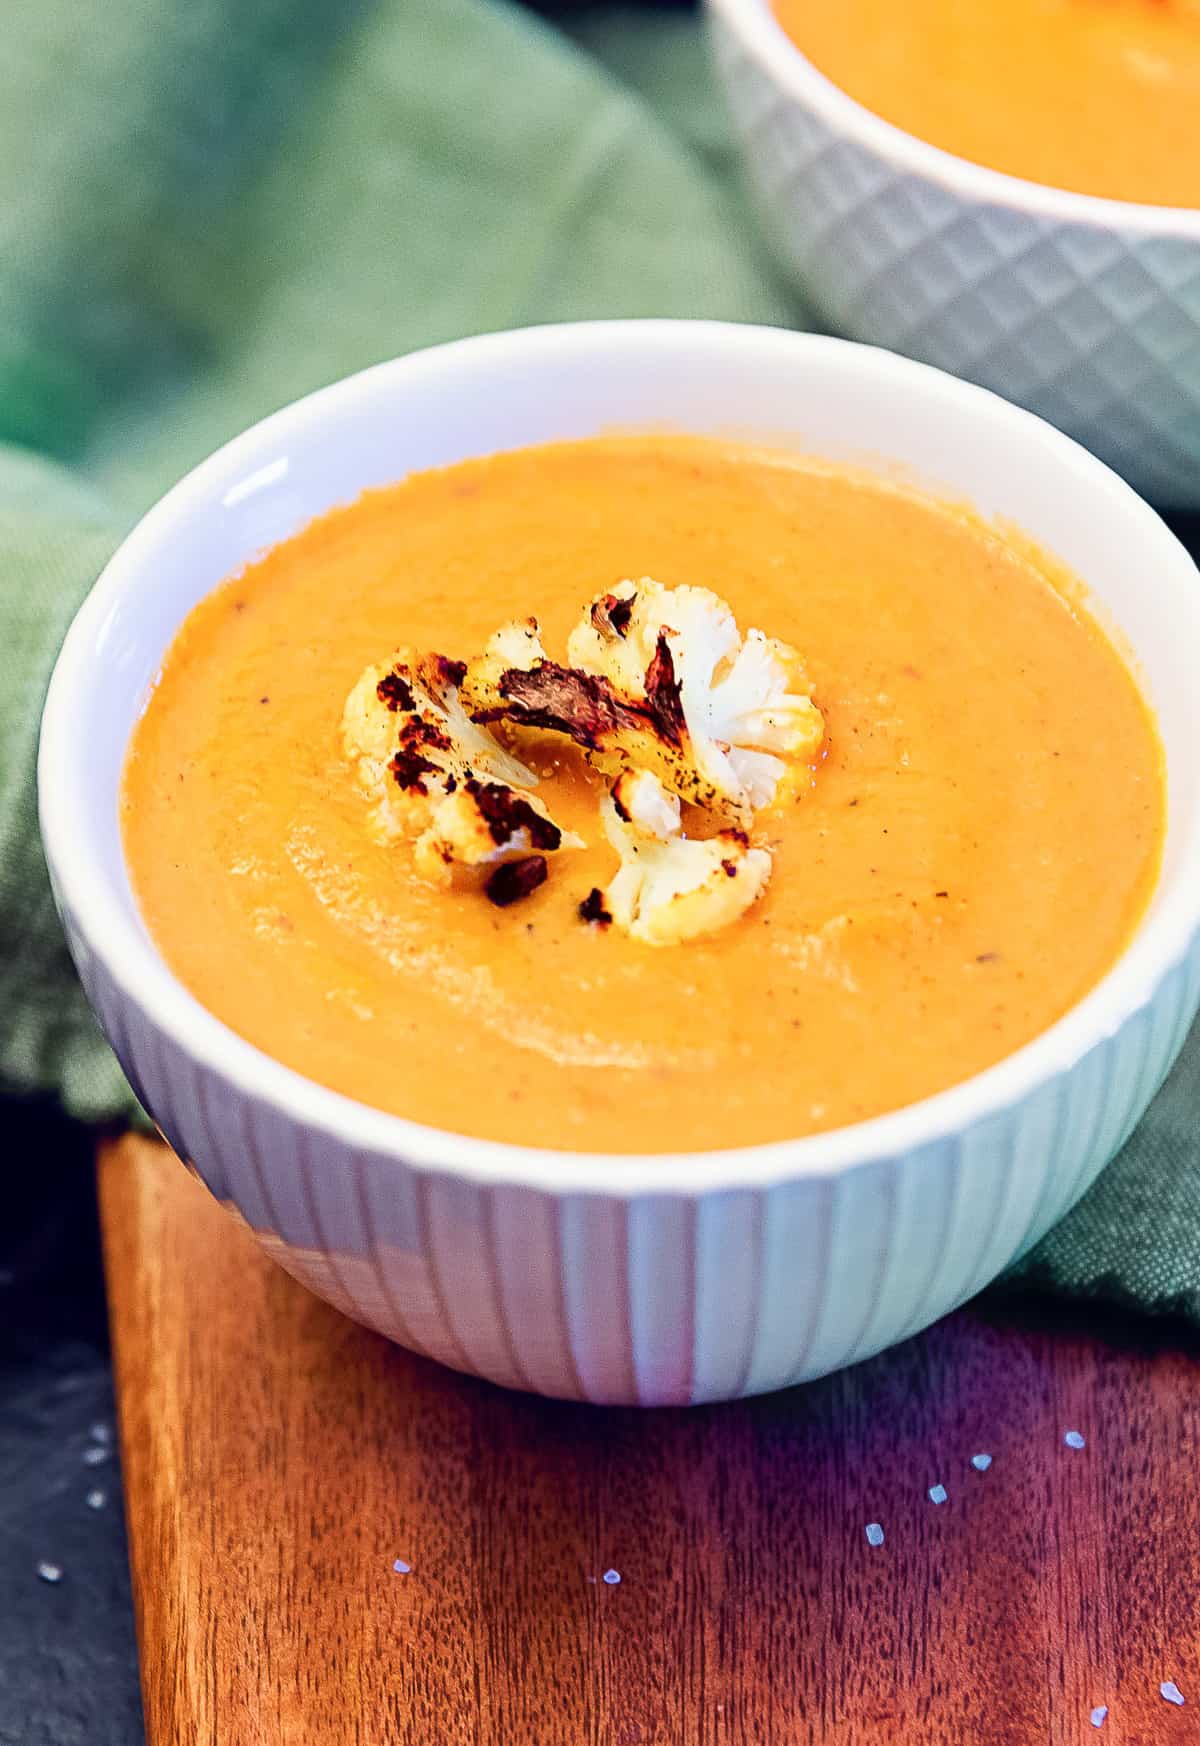 rustic spicy cauliflower soup, cauliflower, soup, recipe, vegan, vegetarian, whole food plant based, wfpb, gluten free, oil free, refined sugar free, no oil, no refined sugar, no dairy, dinner, lunch, appetizer, dinner party, entertaining, simple, healthy